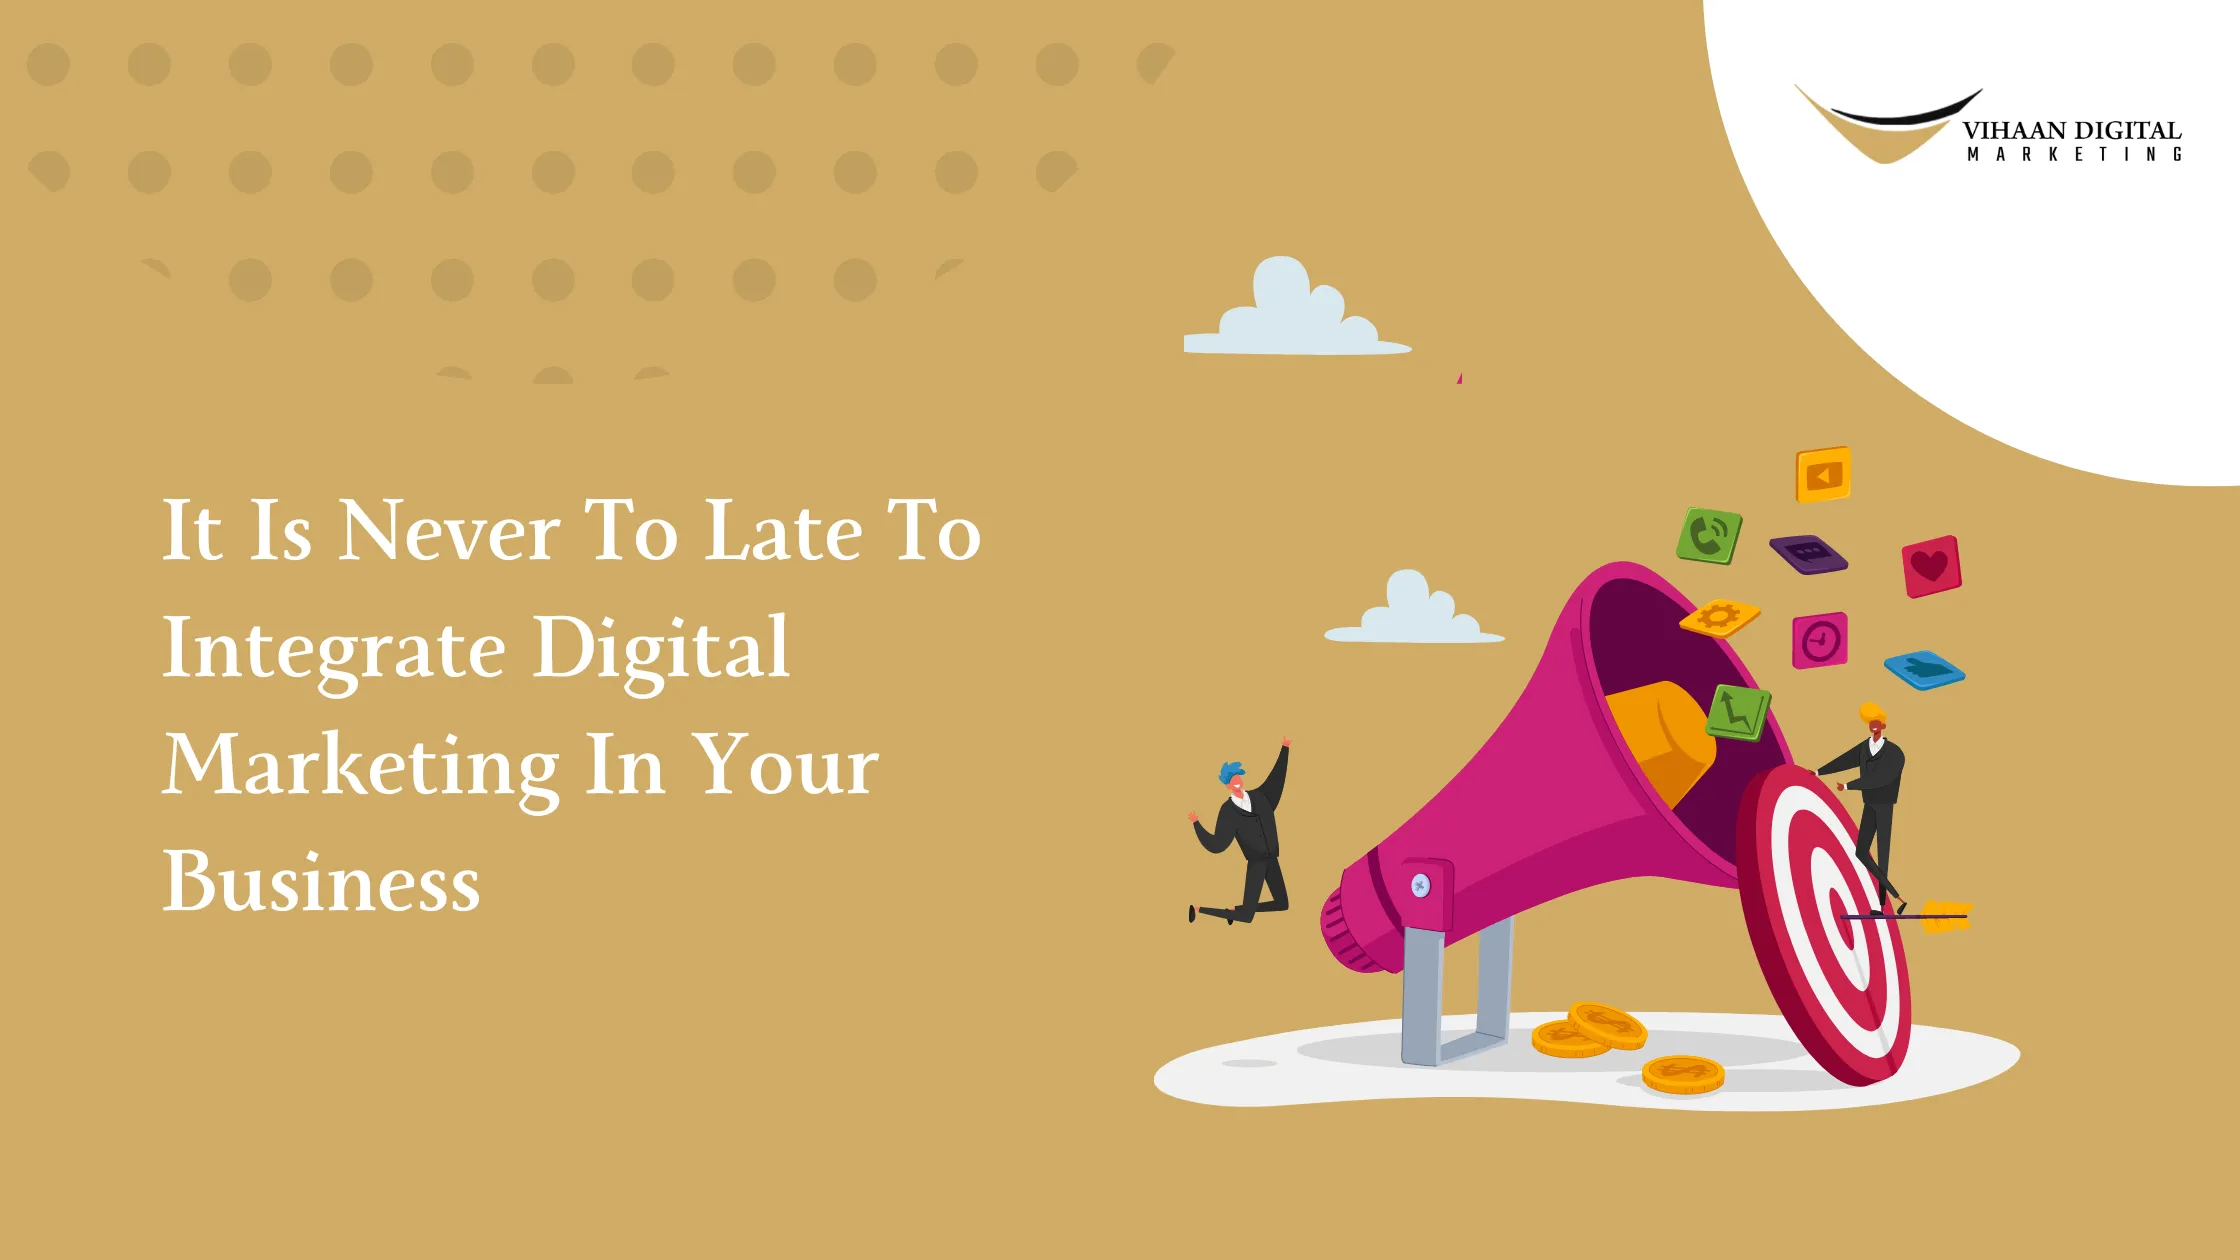 Digital Marketing In Your Business